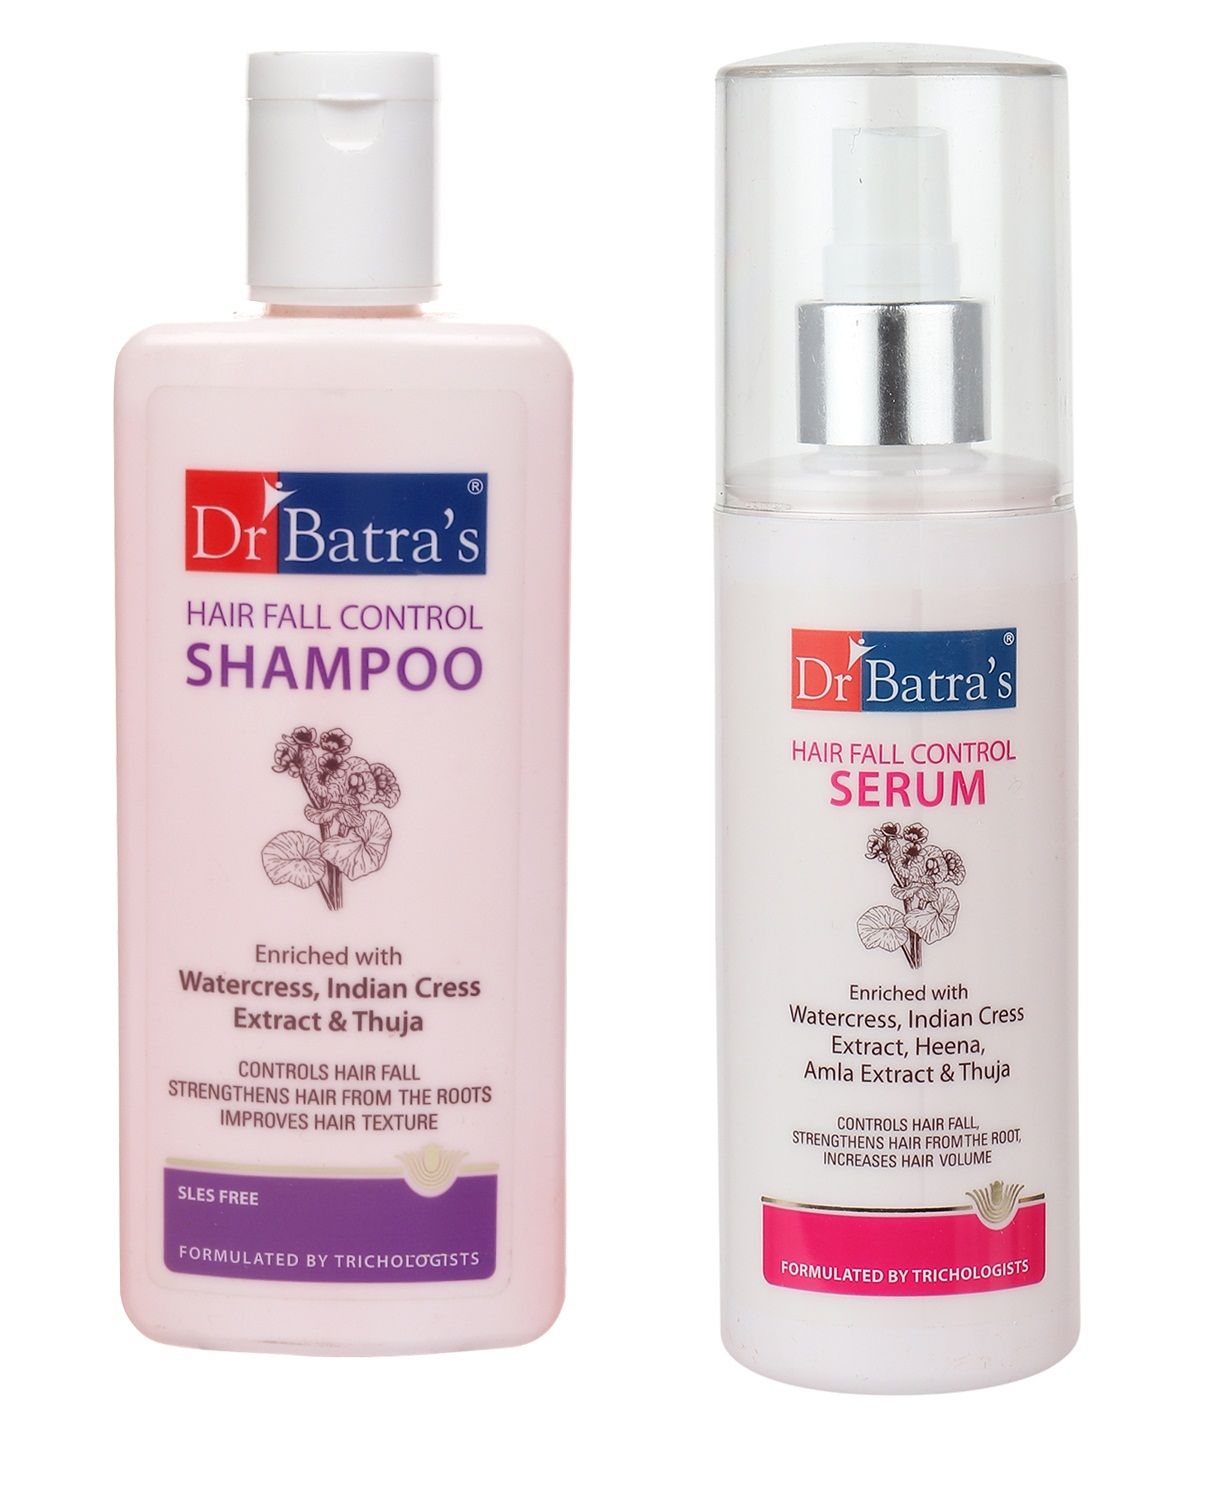 DrBatras Normal Hair Shampoo 200 ml Price Uses Side Effects  Composition  Apollo Pharmacy